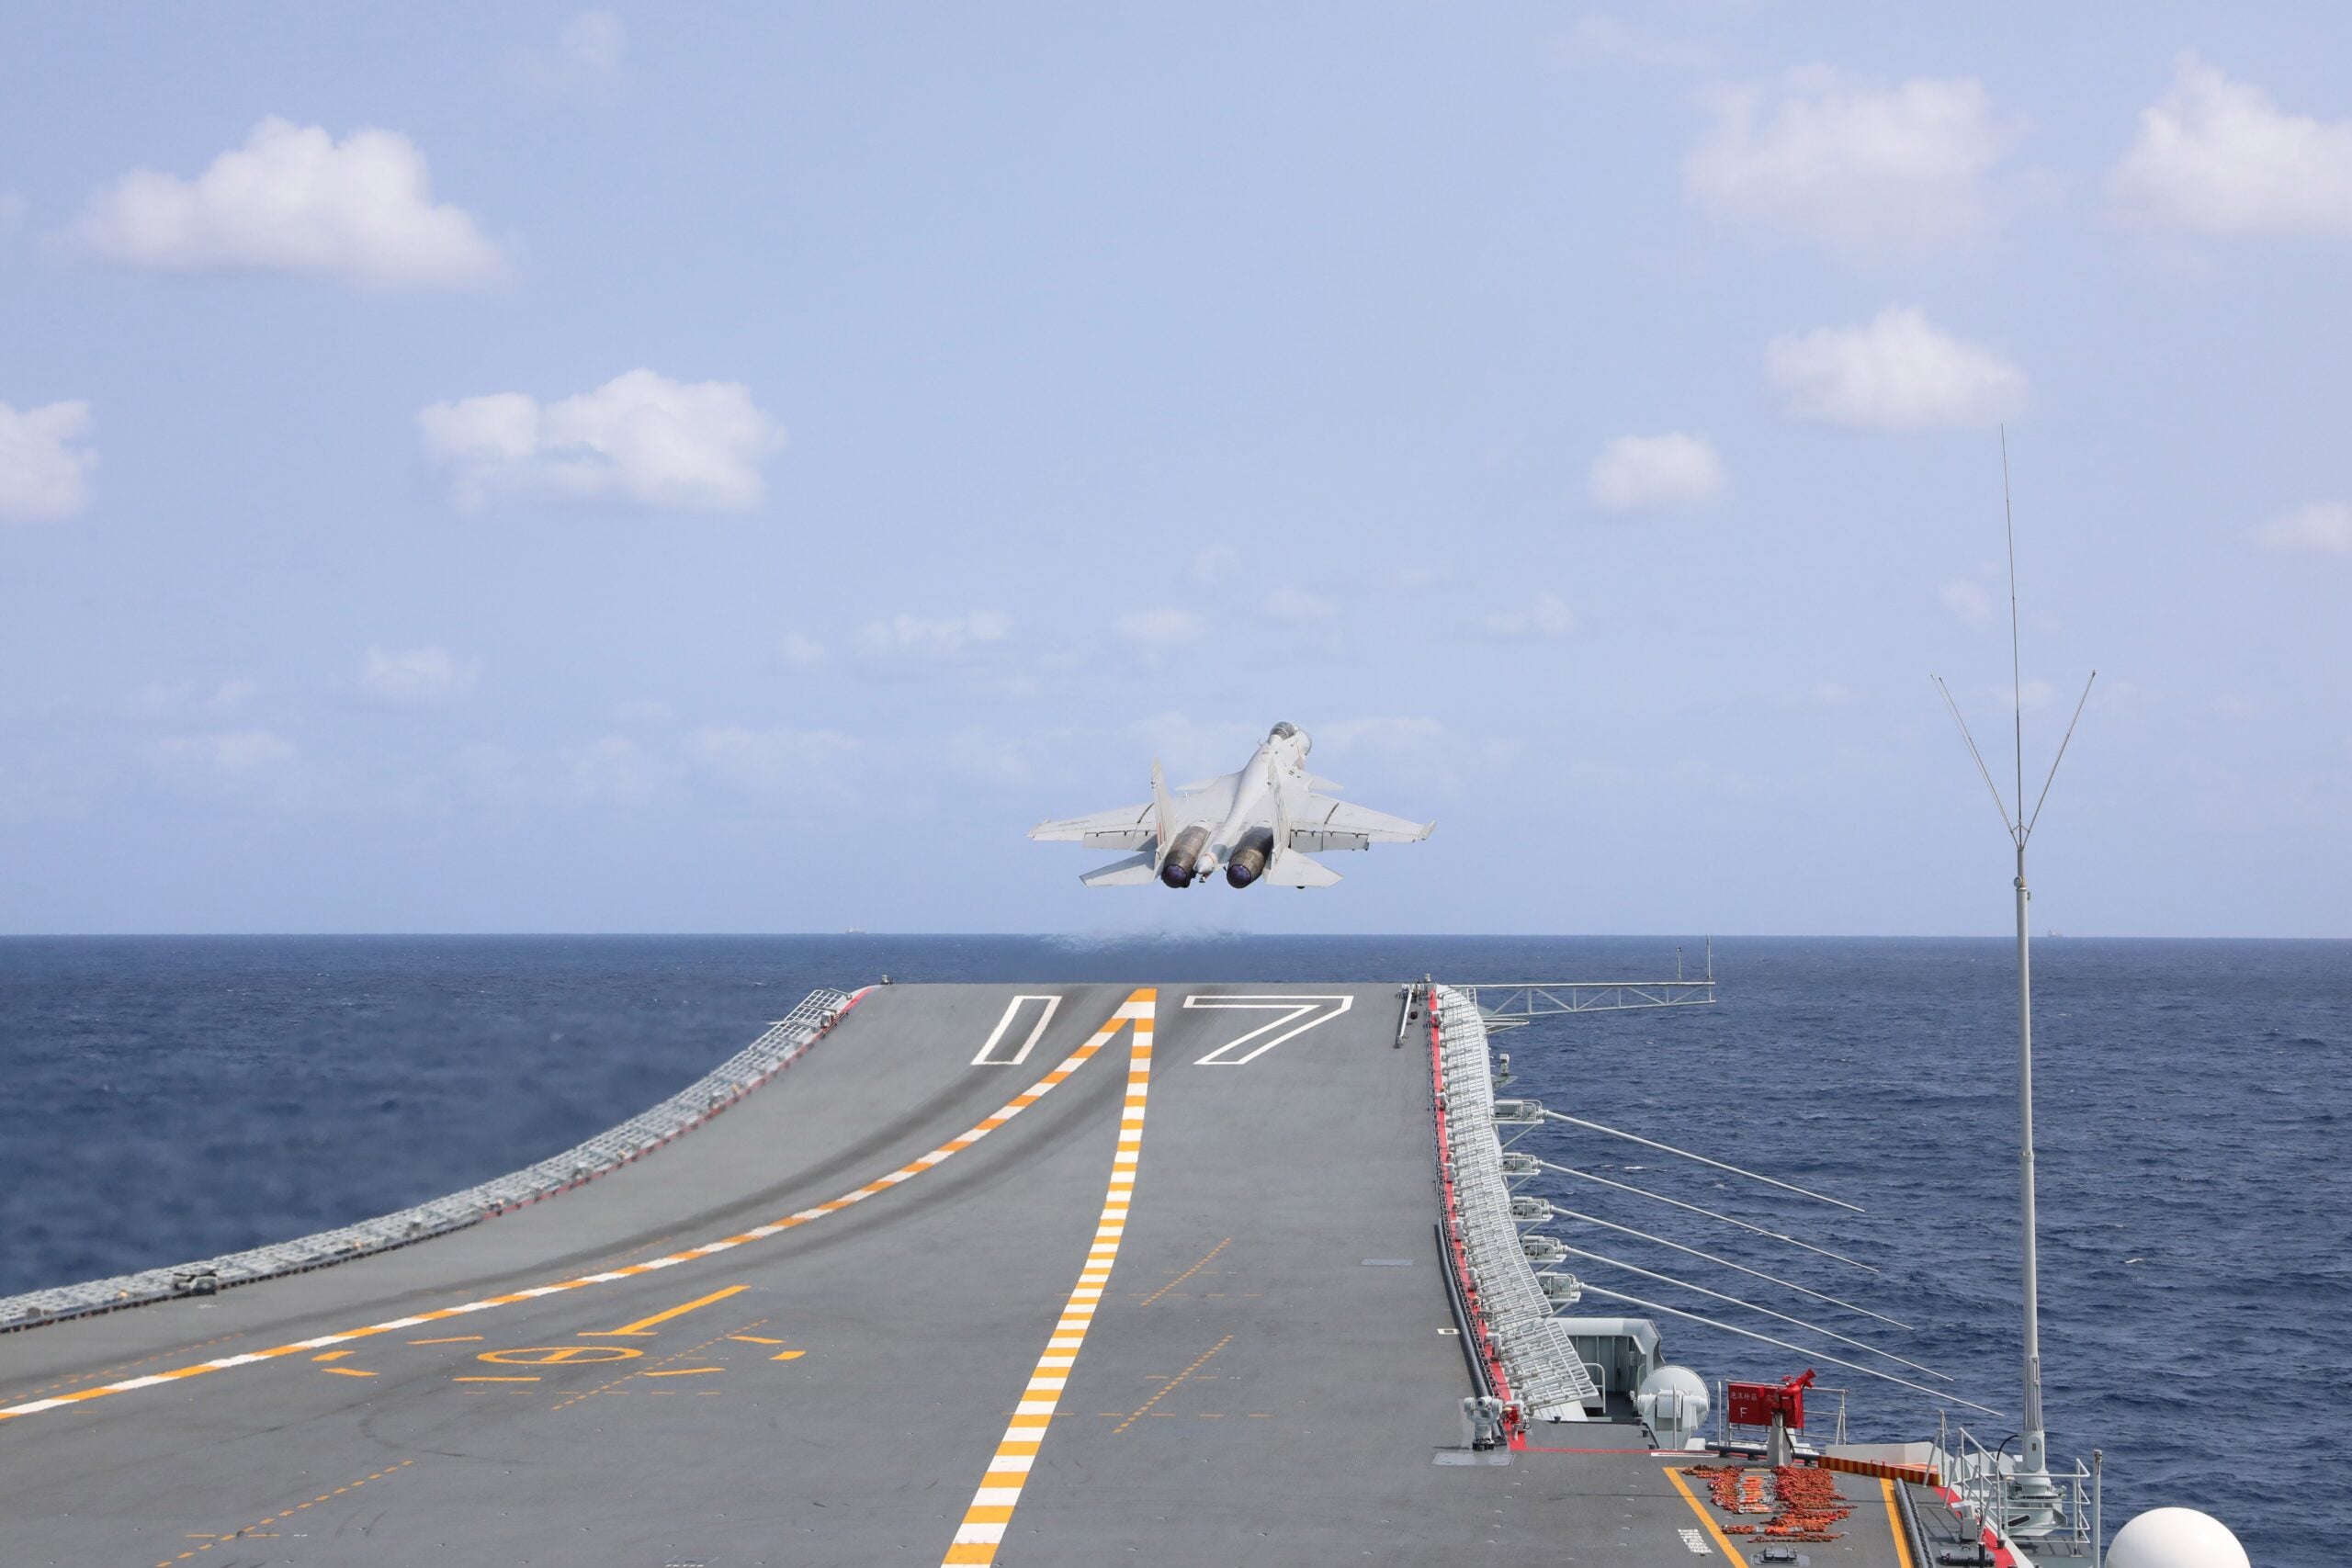 This photo taken on April 9, 2023 shows a J-15 fighter taking off from aircraft carrier Shandong during the combat readiness patrol and military exercises around the Taiwan Island by the Eastern Theater Command of the Chinese People's Liberation Army PLA. The Eastern Theater Command of the PLA has accomplished all tasks in the combat readiness patrol and military exercises carried out from April 8 to 10 around the Taiwan Island.The operations have comprehensively tested the integrated joint combat capability of the PLA's multiple services and arms under actual combat conditions. (Photo by An Ni/Xinhua via Getty Images)